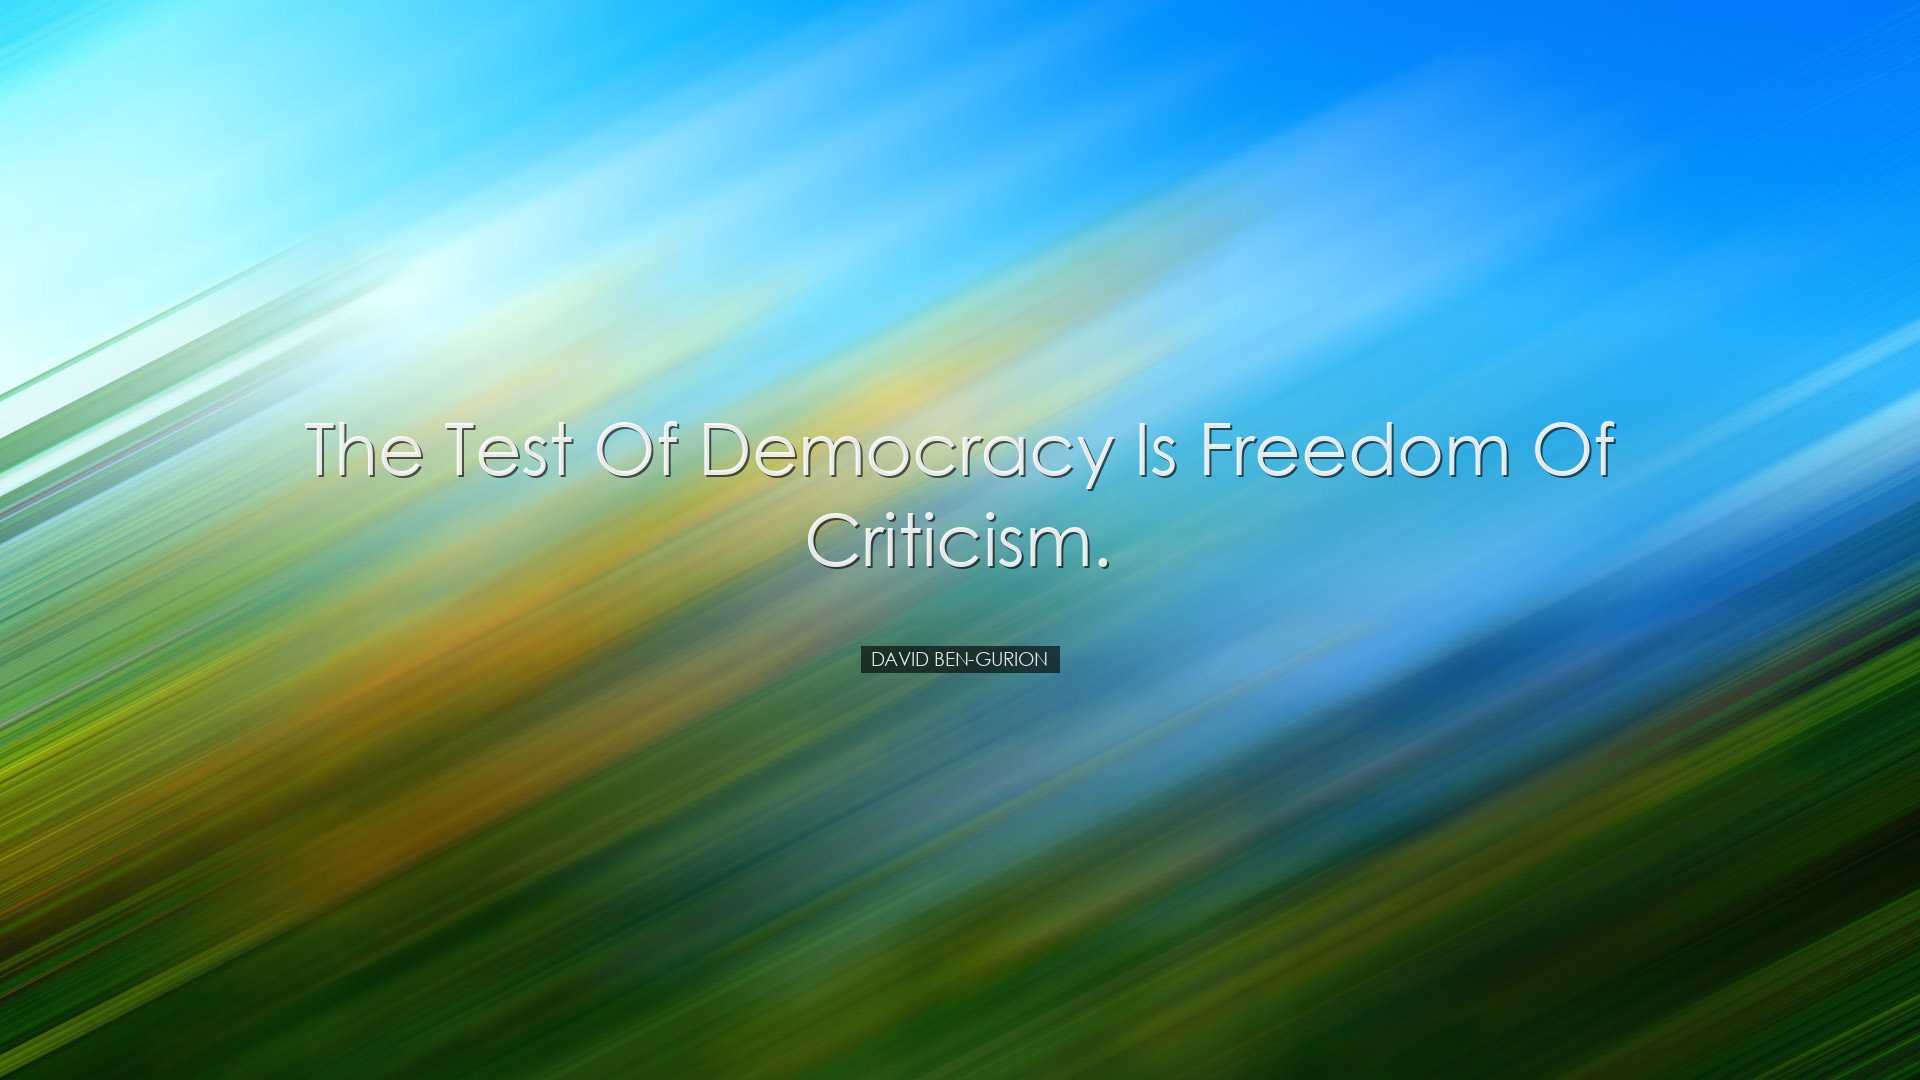 The test of democracy is freedom of criticism. - David Ben-Gurion